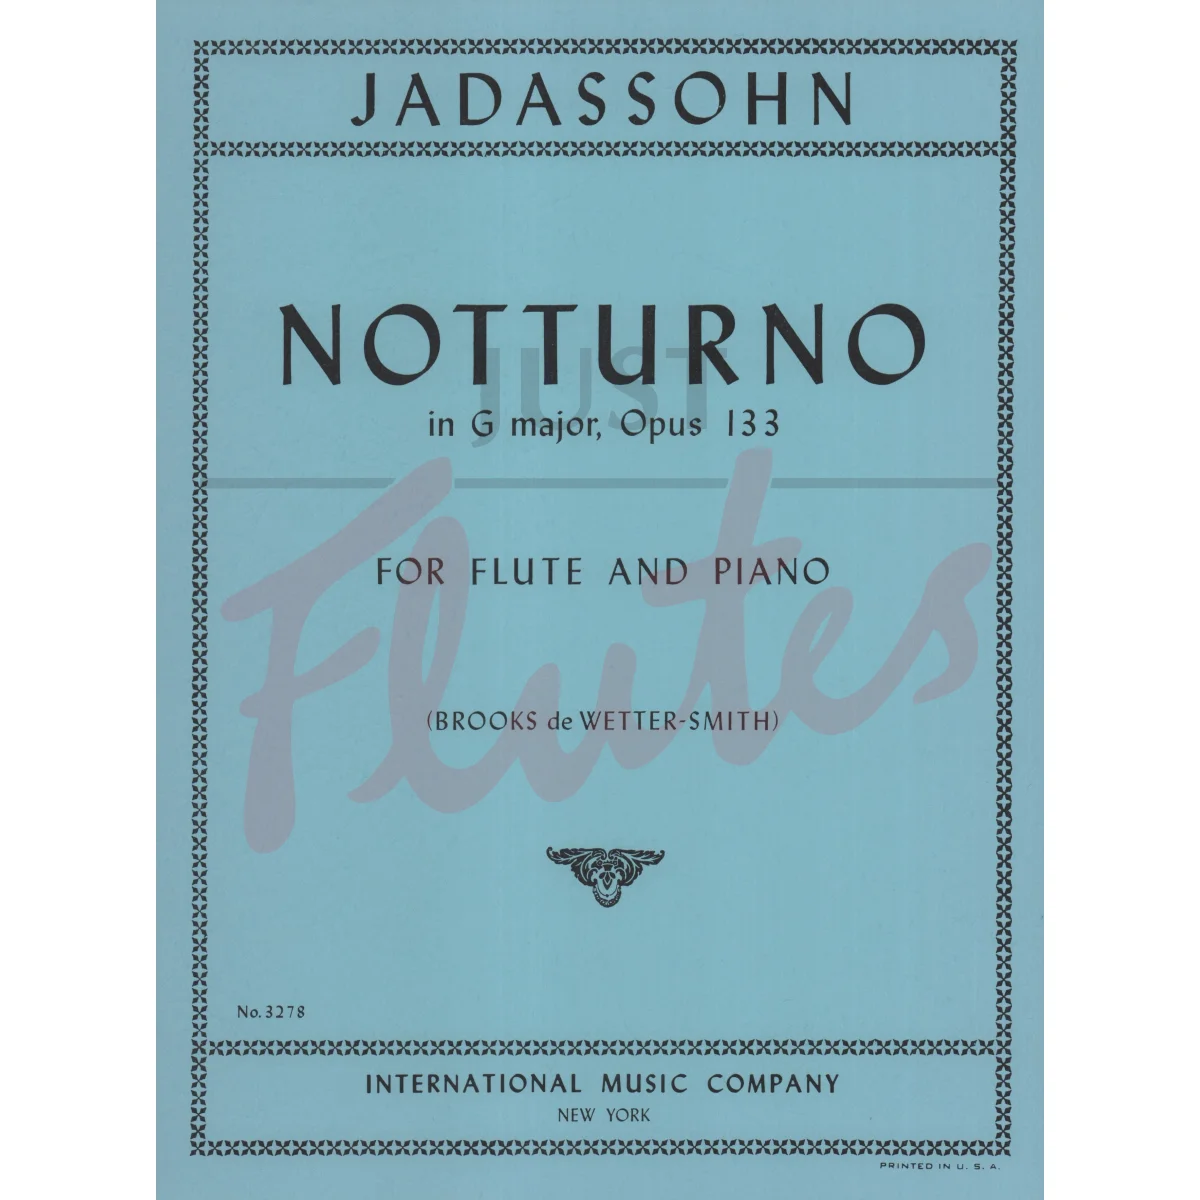 Notturno in G major for Flute and Piano